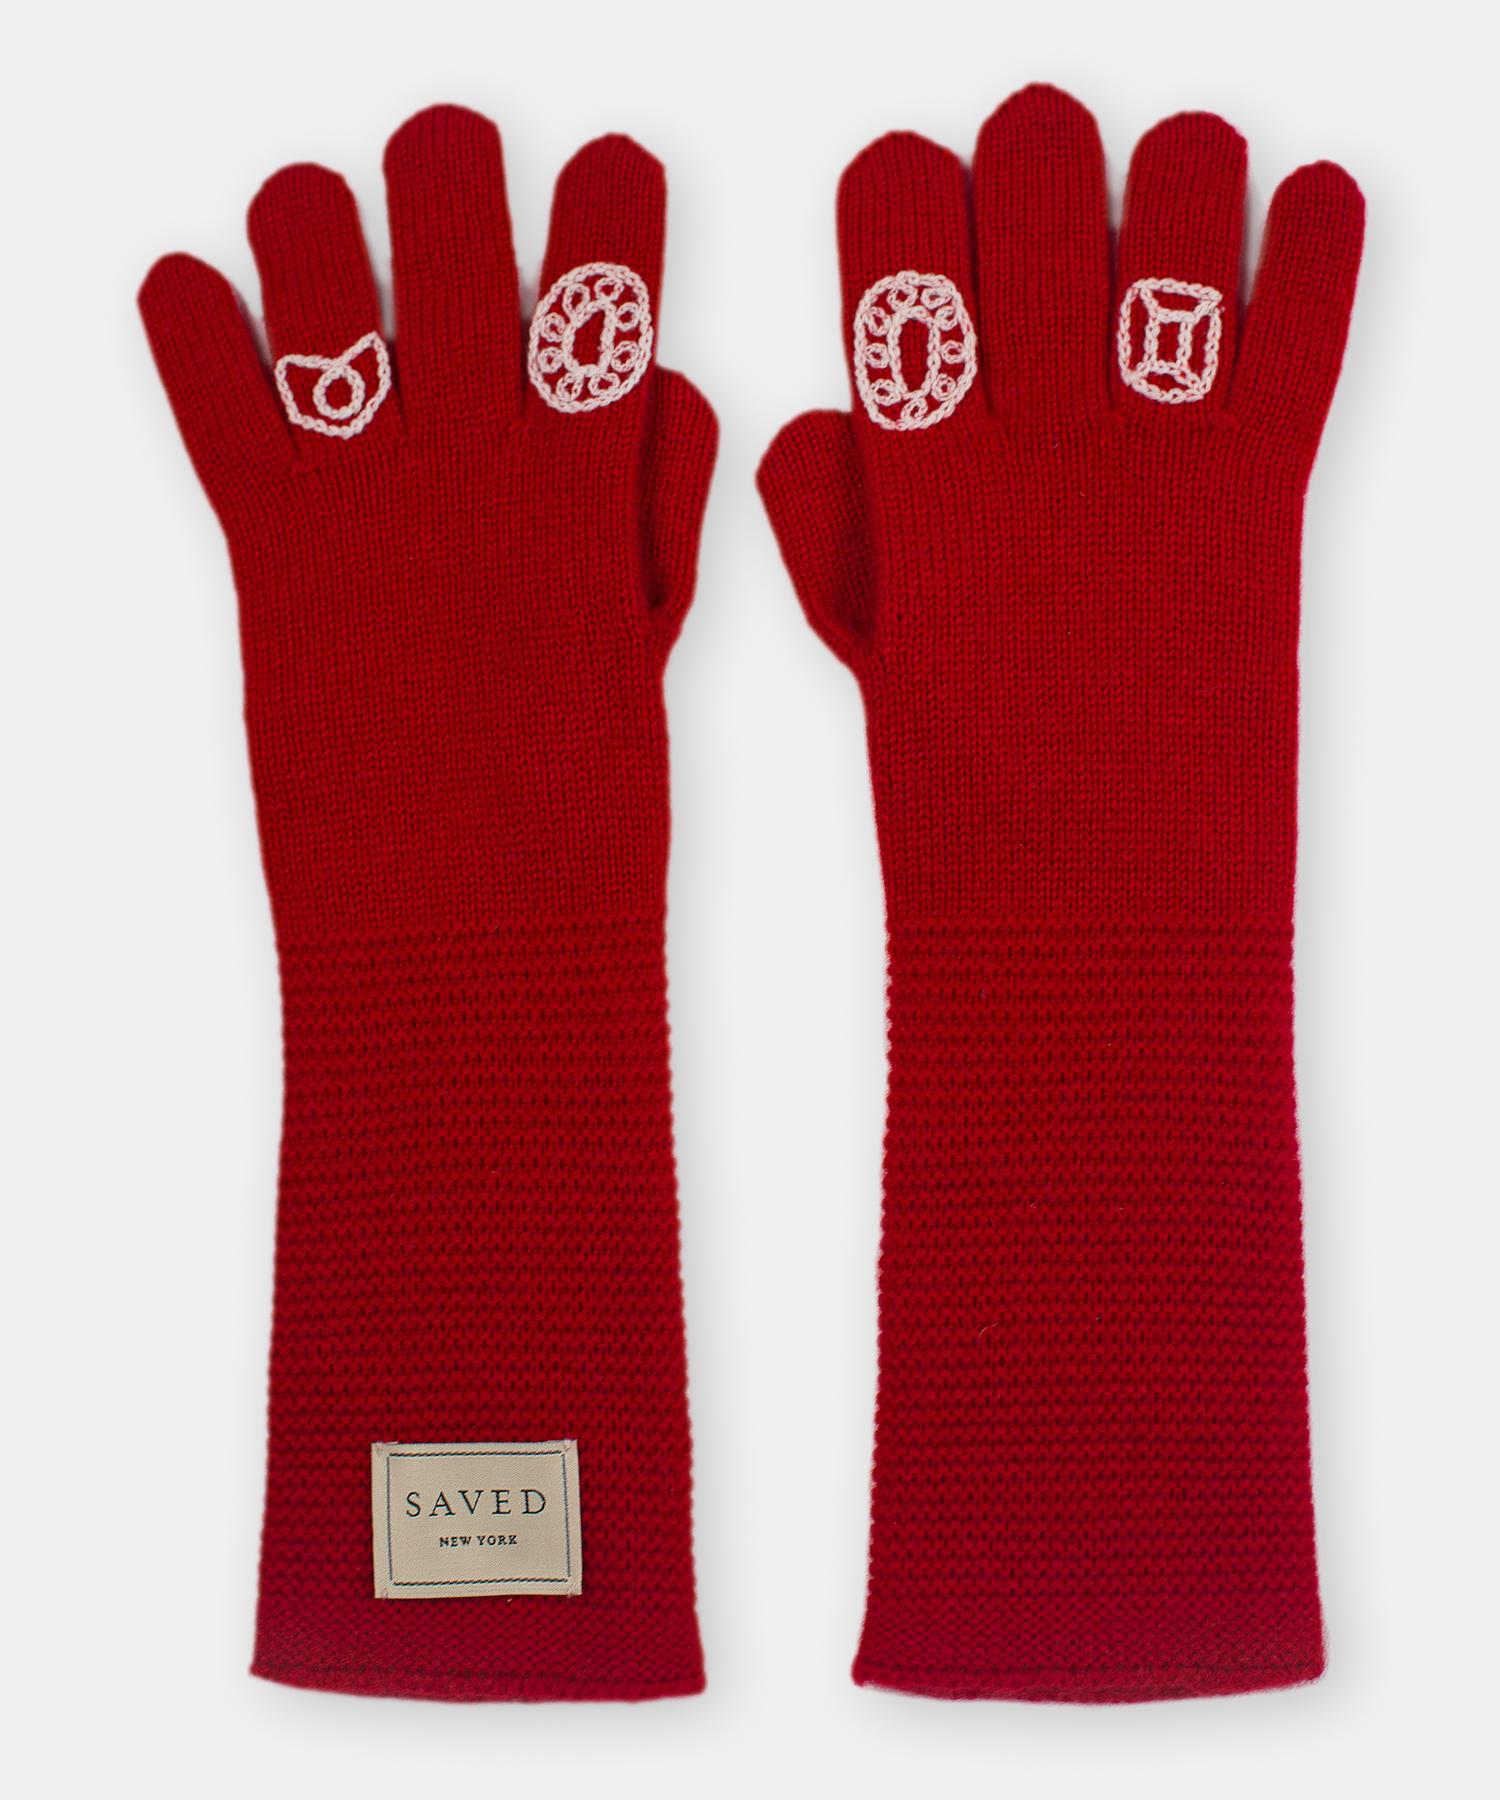 Red opera gloves by Saved, New York

Long, elegant length with hand embroidered details suitable for the theatre. One size.